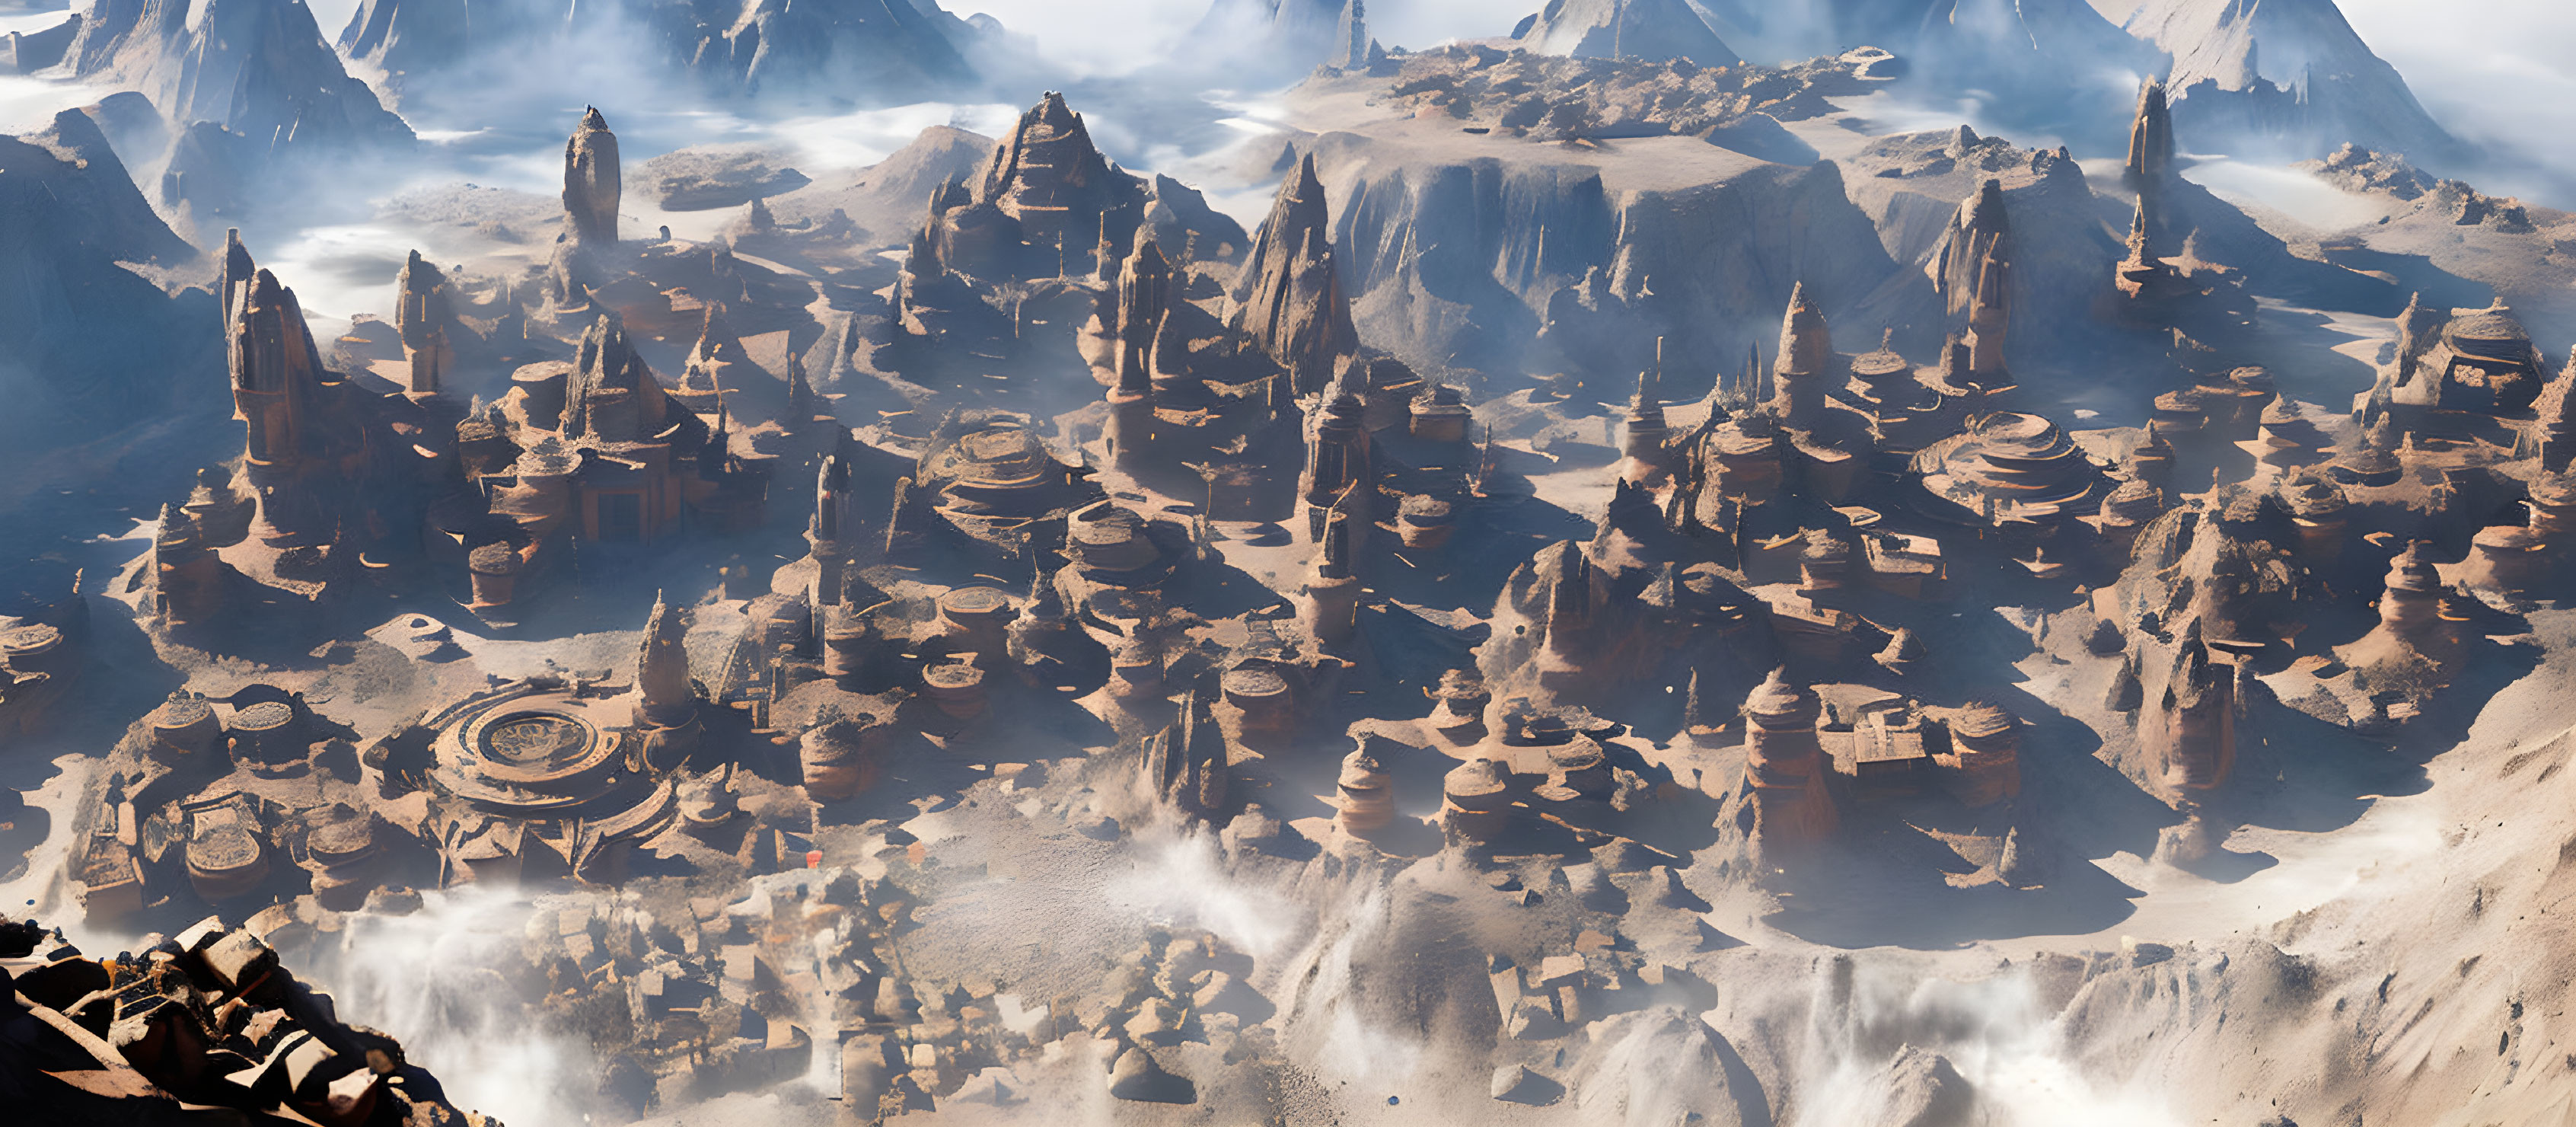 Rugged Desert Landscape with Rocky Formations and Alien-Like Structures